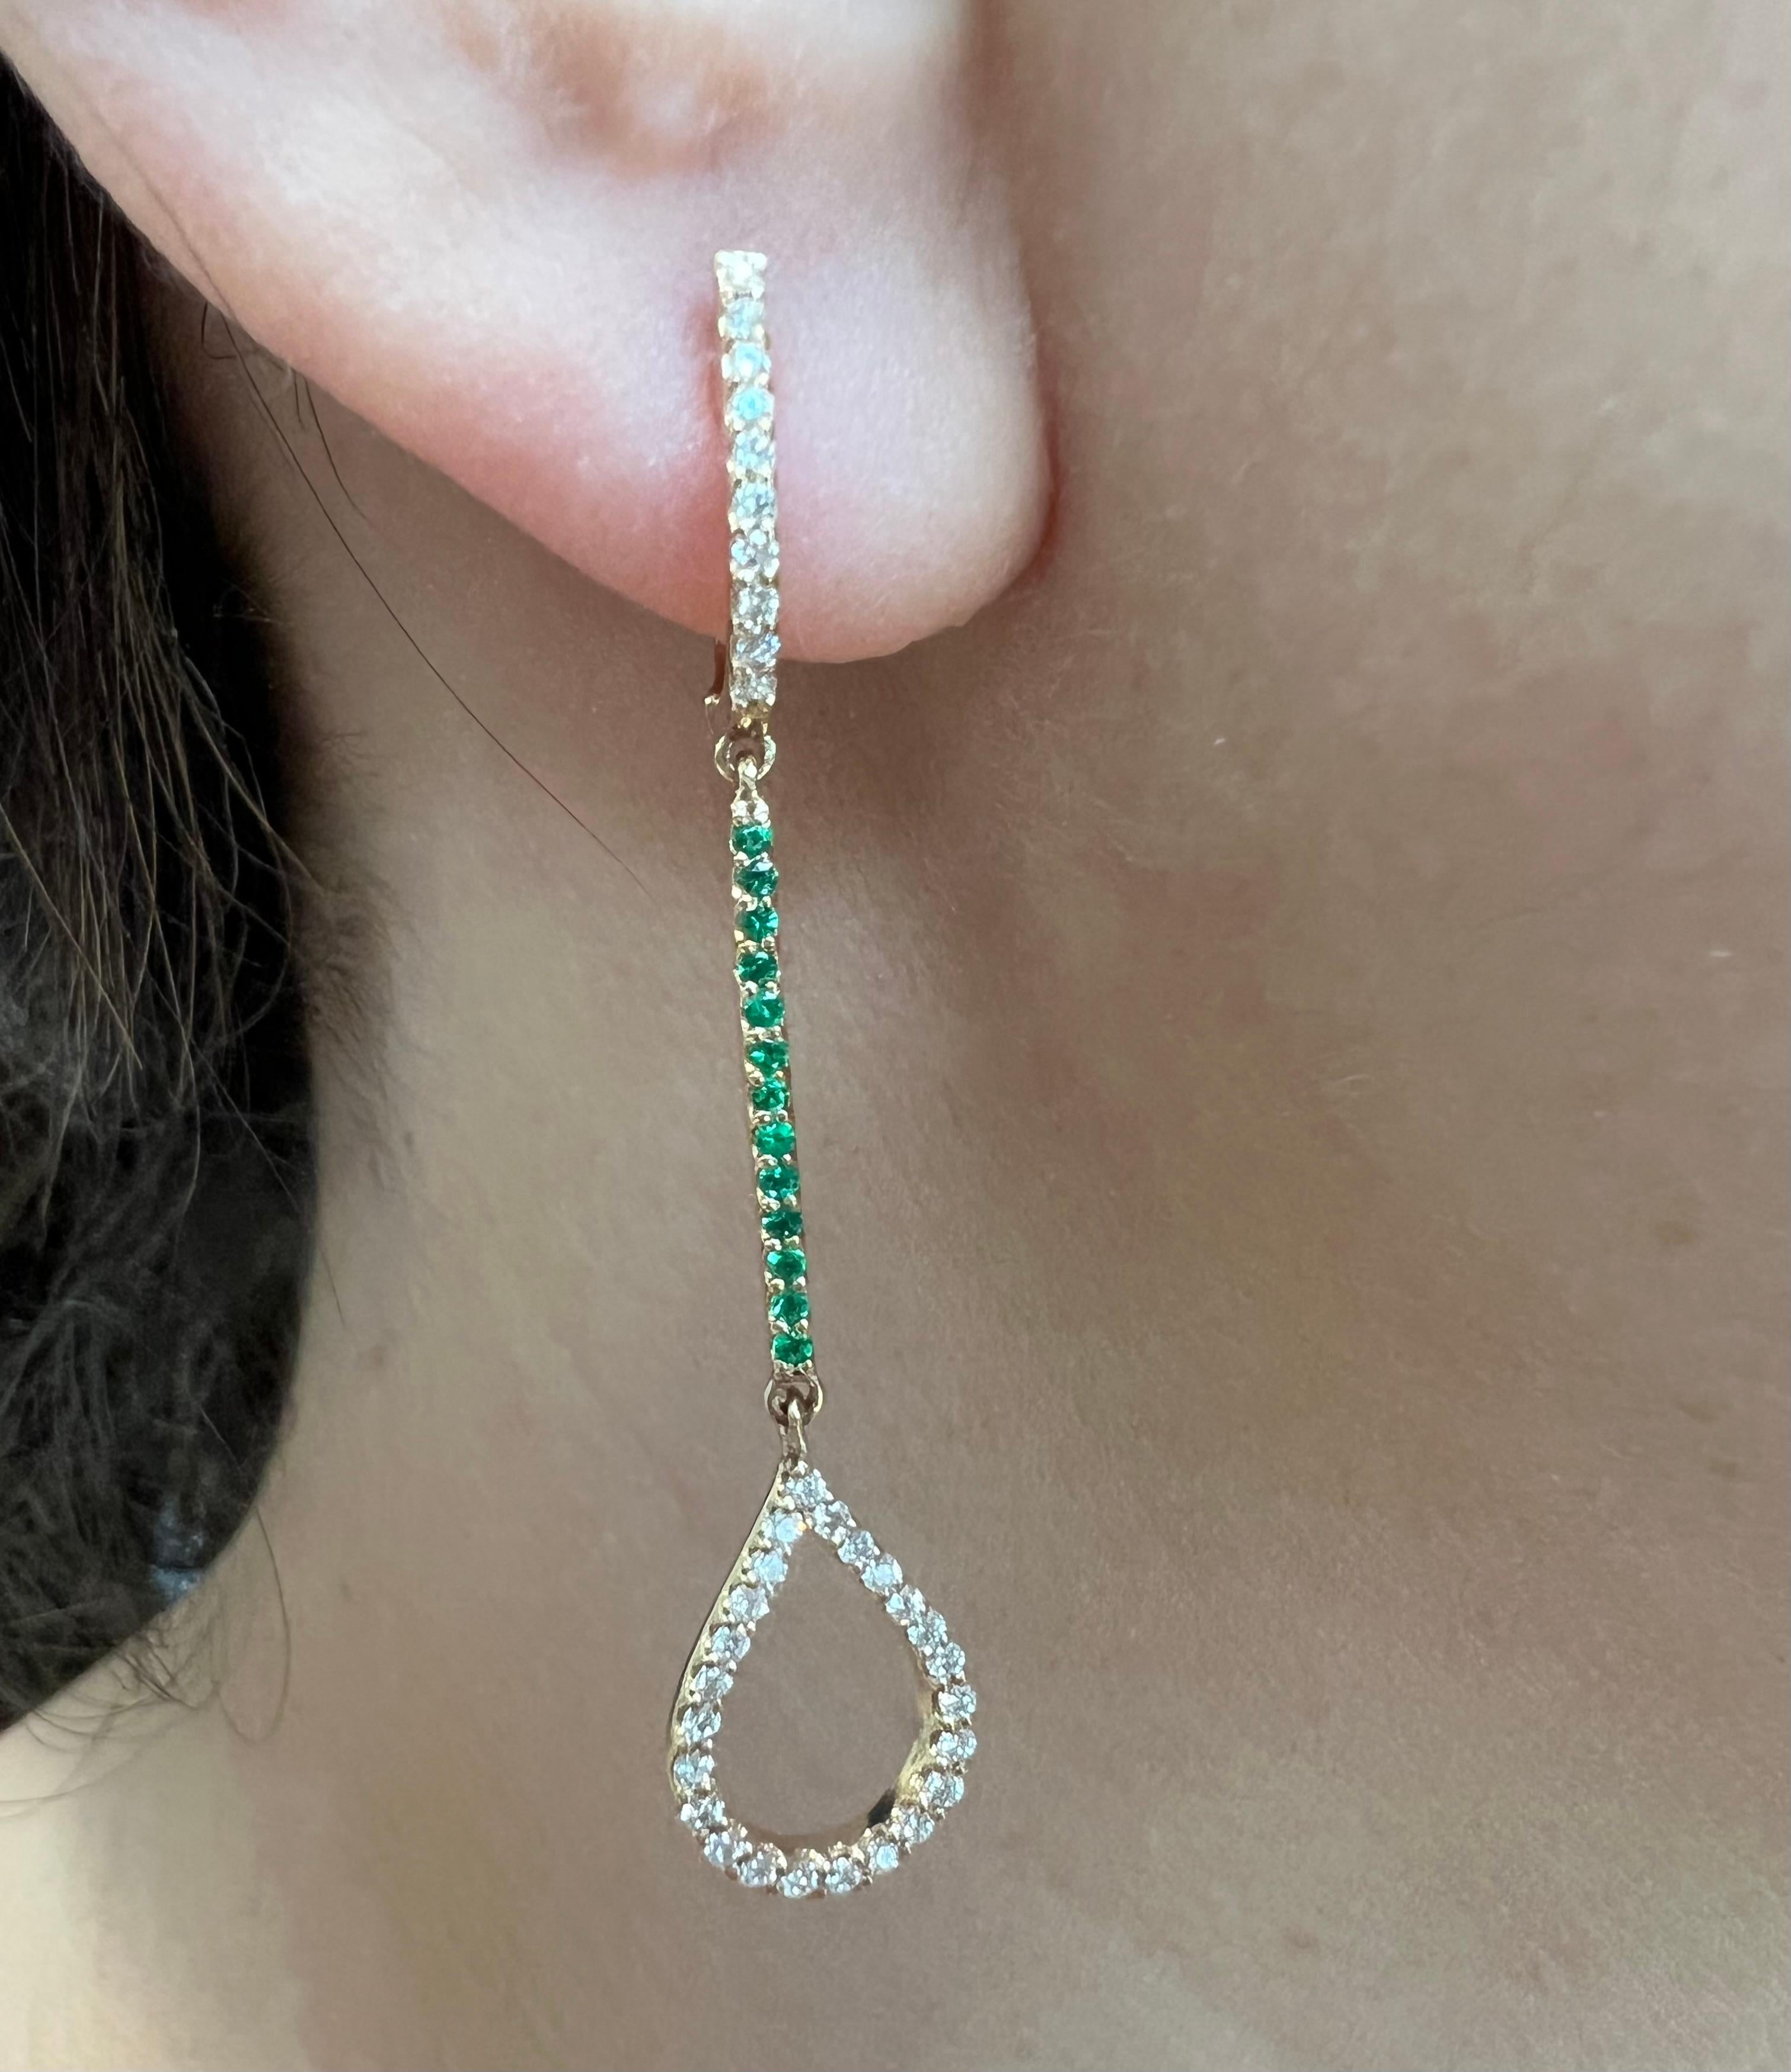 Crafted in 14K rose gold this stunning dangle earring takes the form of a teardrop, with a whole host of dazzling pink sapphire gemstones and shimmering round diamonds delicately lining its form. Lightweight, yet still a major statement piece, this